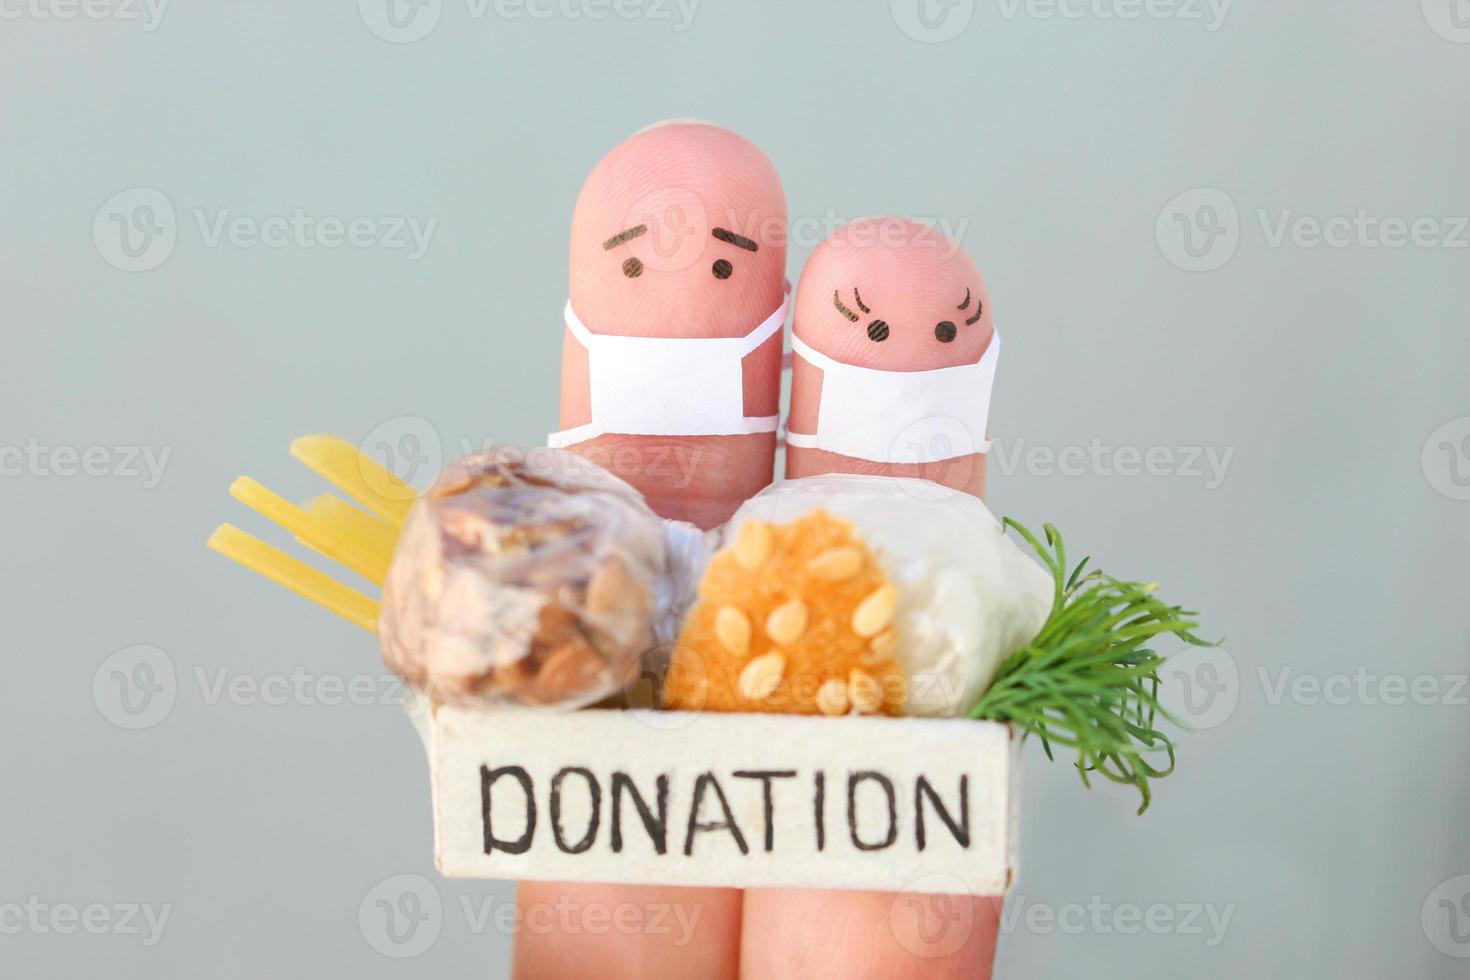 Fingers art of couple with face mask. Man  and woman holding donation box with food. photo